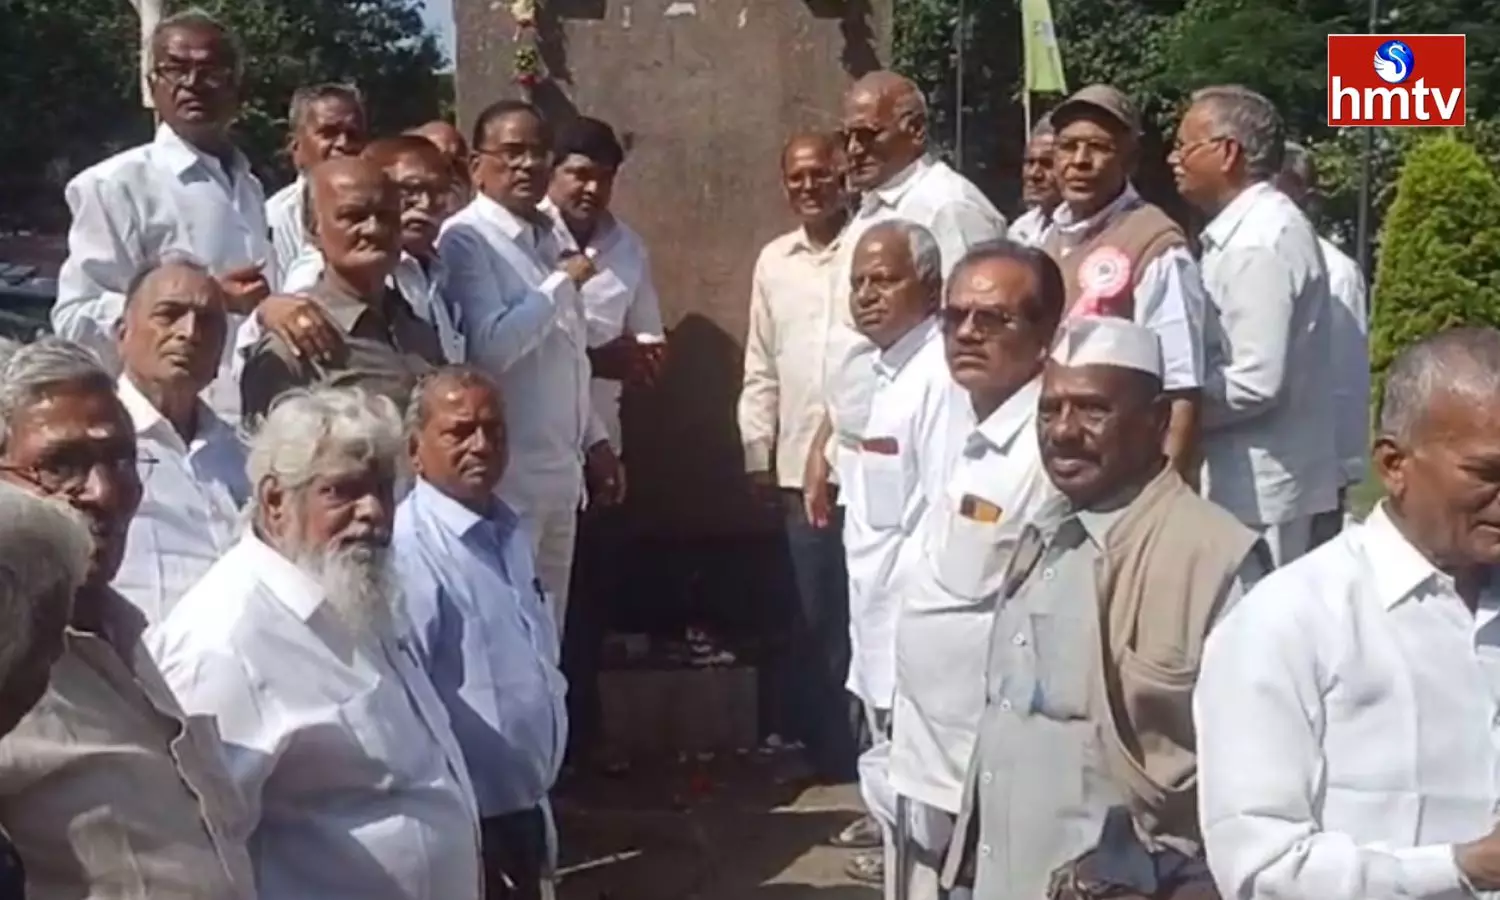 1969 Telangana activist who supported the new government